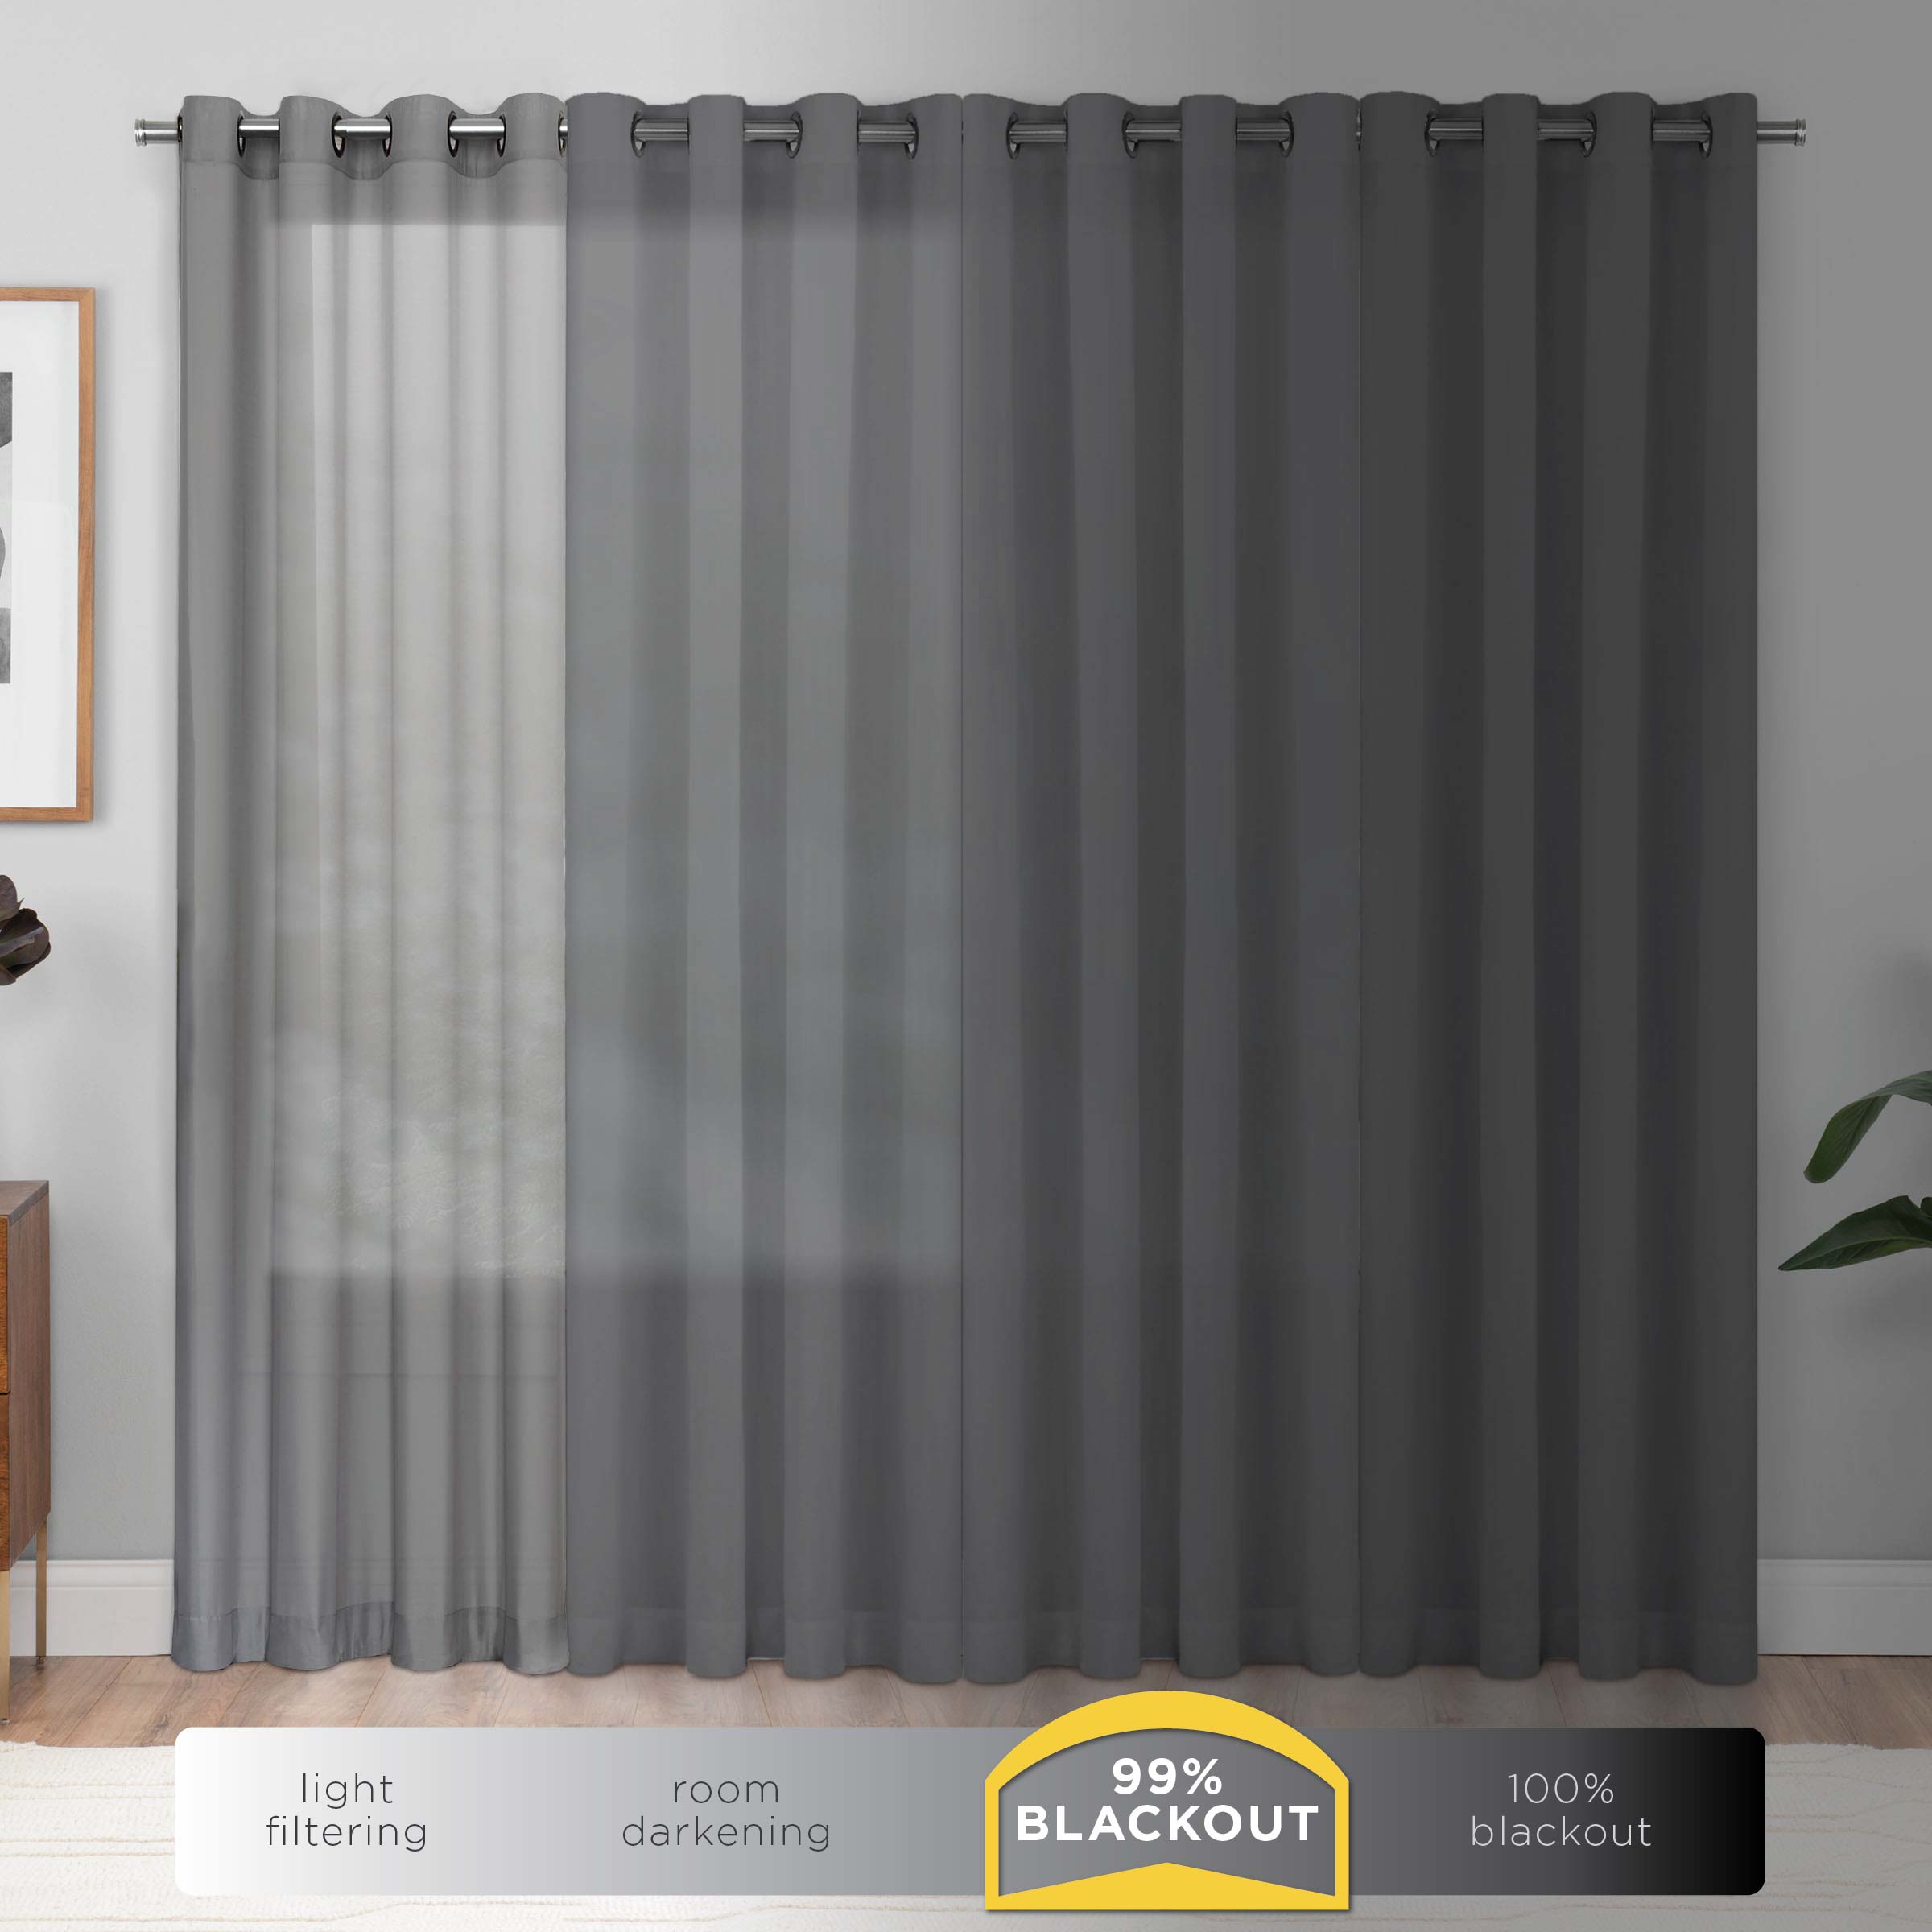 Eclipse Nottingham Thermal Energy-Efficient Grommet Curtain Panel, 40" x 84", Brown,Chocolate - image 3 of 5